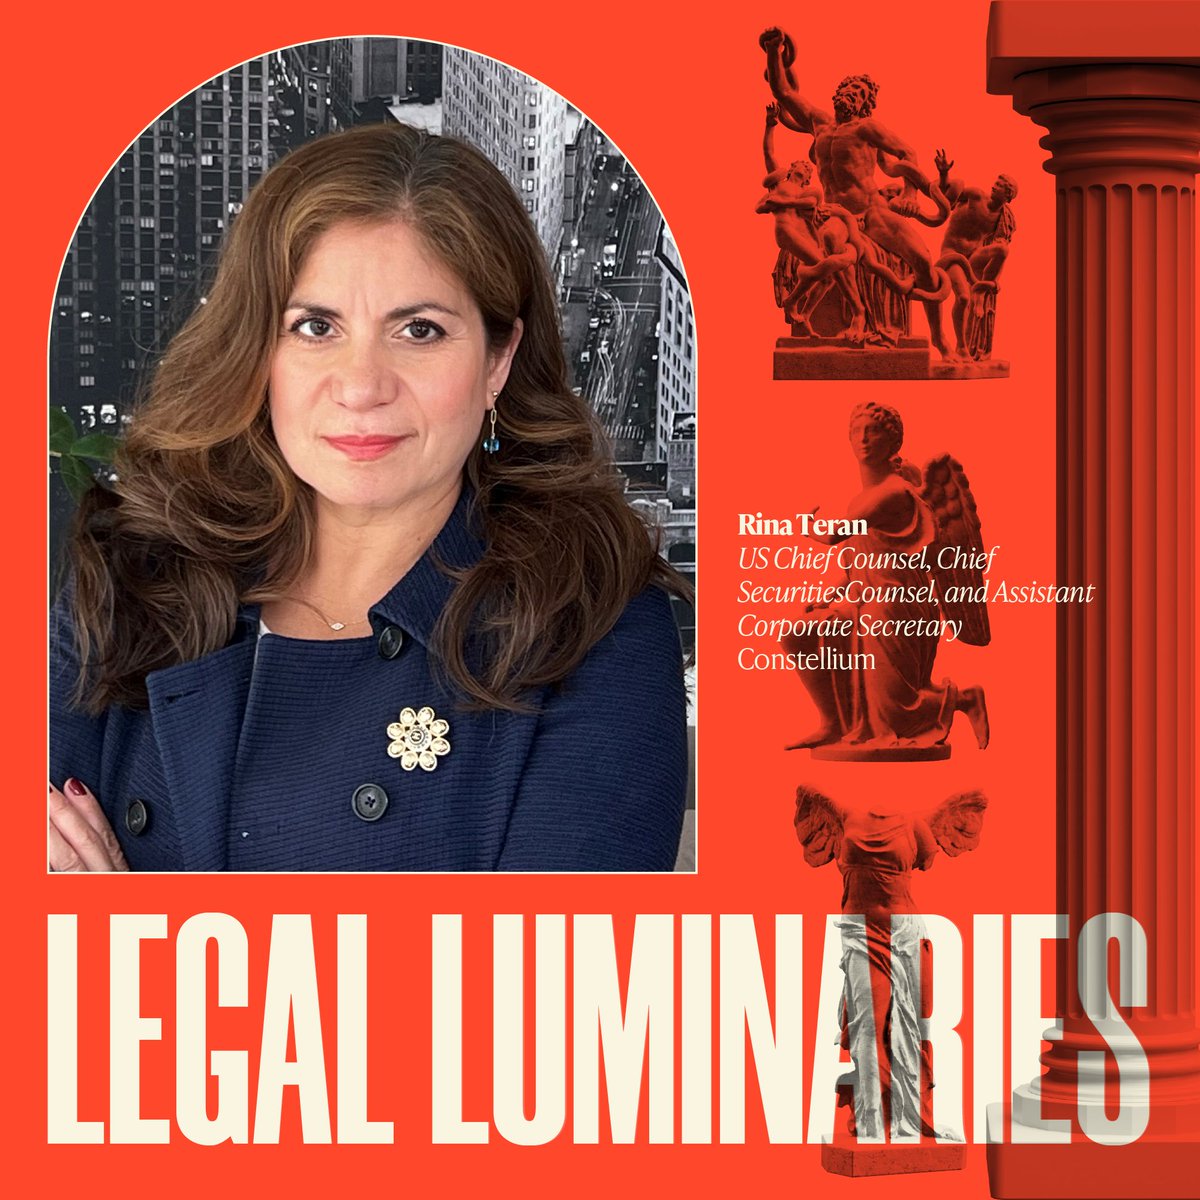 LEGAL LUMINARIES ⚖️: Constellium’s Rina Teran calls for more leaders to step into a sponsorship role to open more doors for women and Latinas. Read more: hubs.la/Q02wn7v50 #HispanicExecMag #LegalLuminaries #LatinaLeaders @Constellium